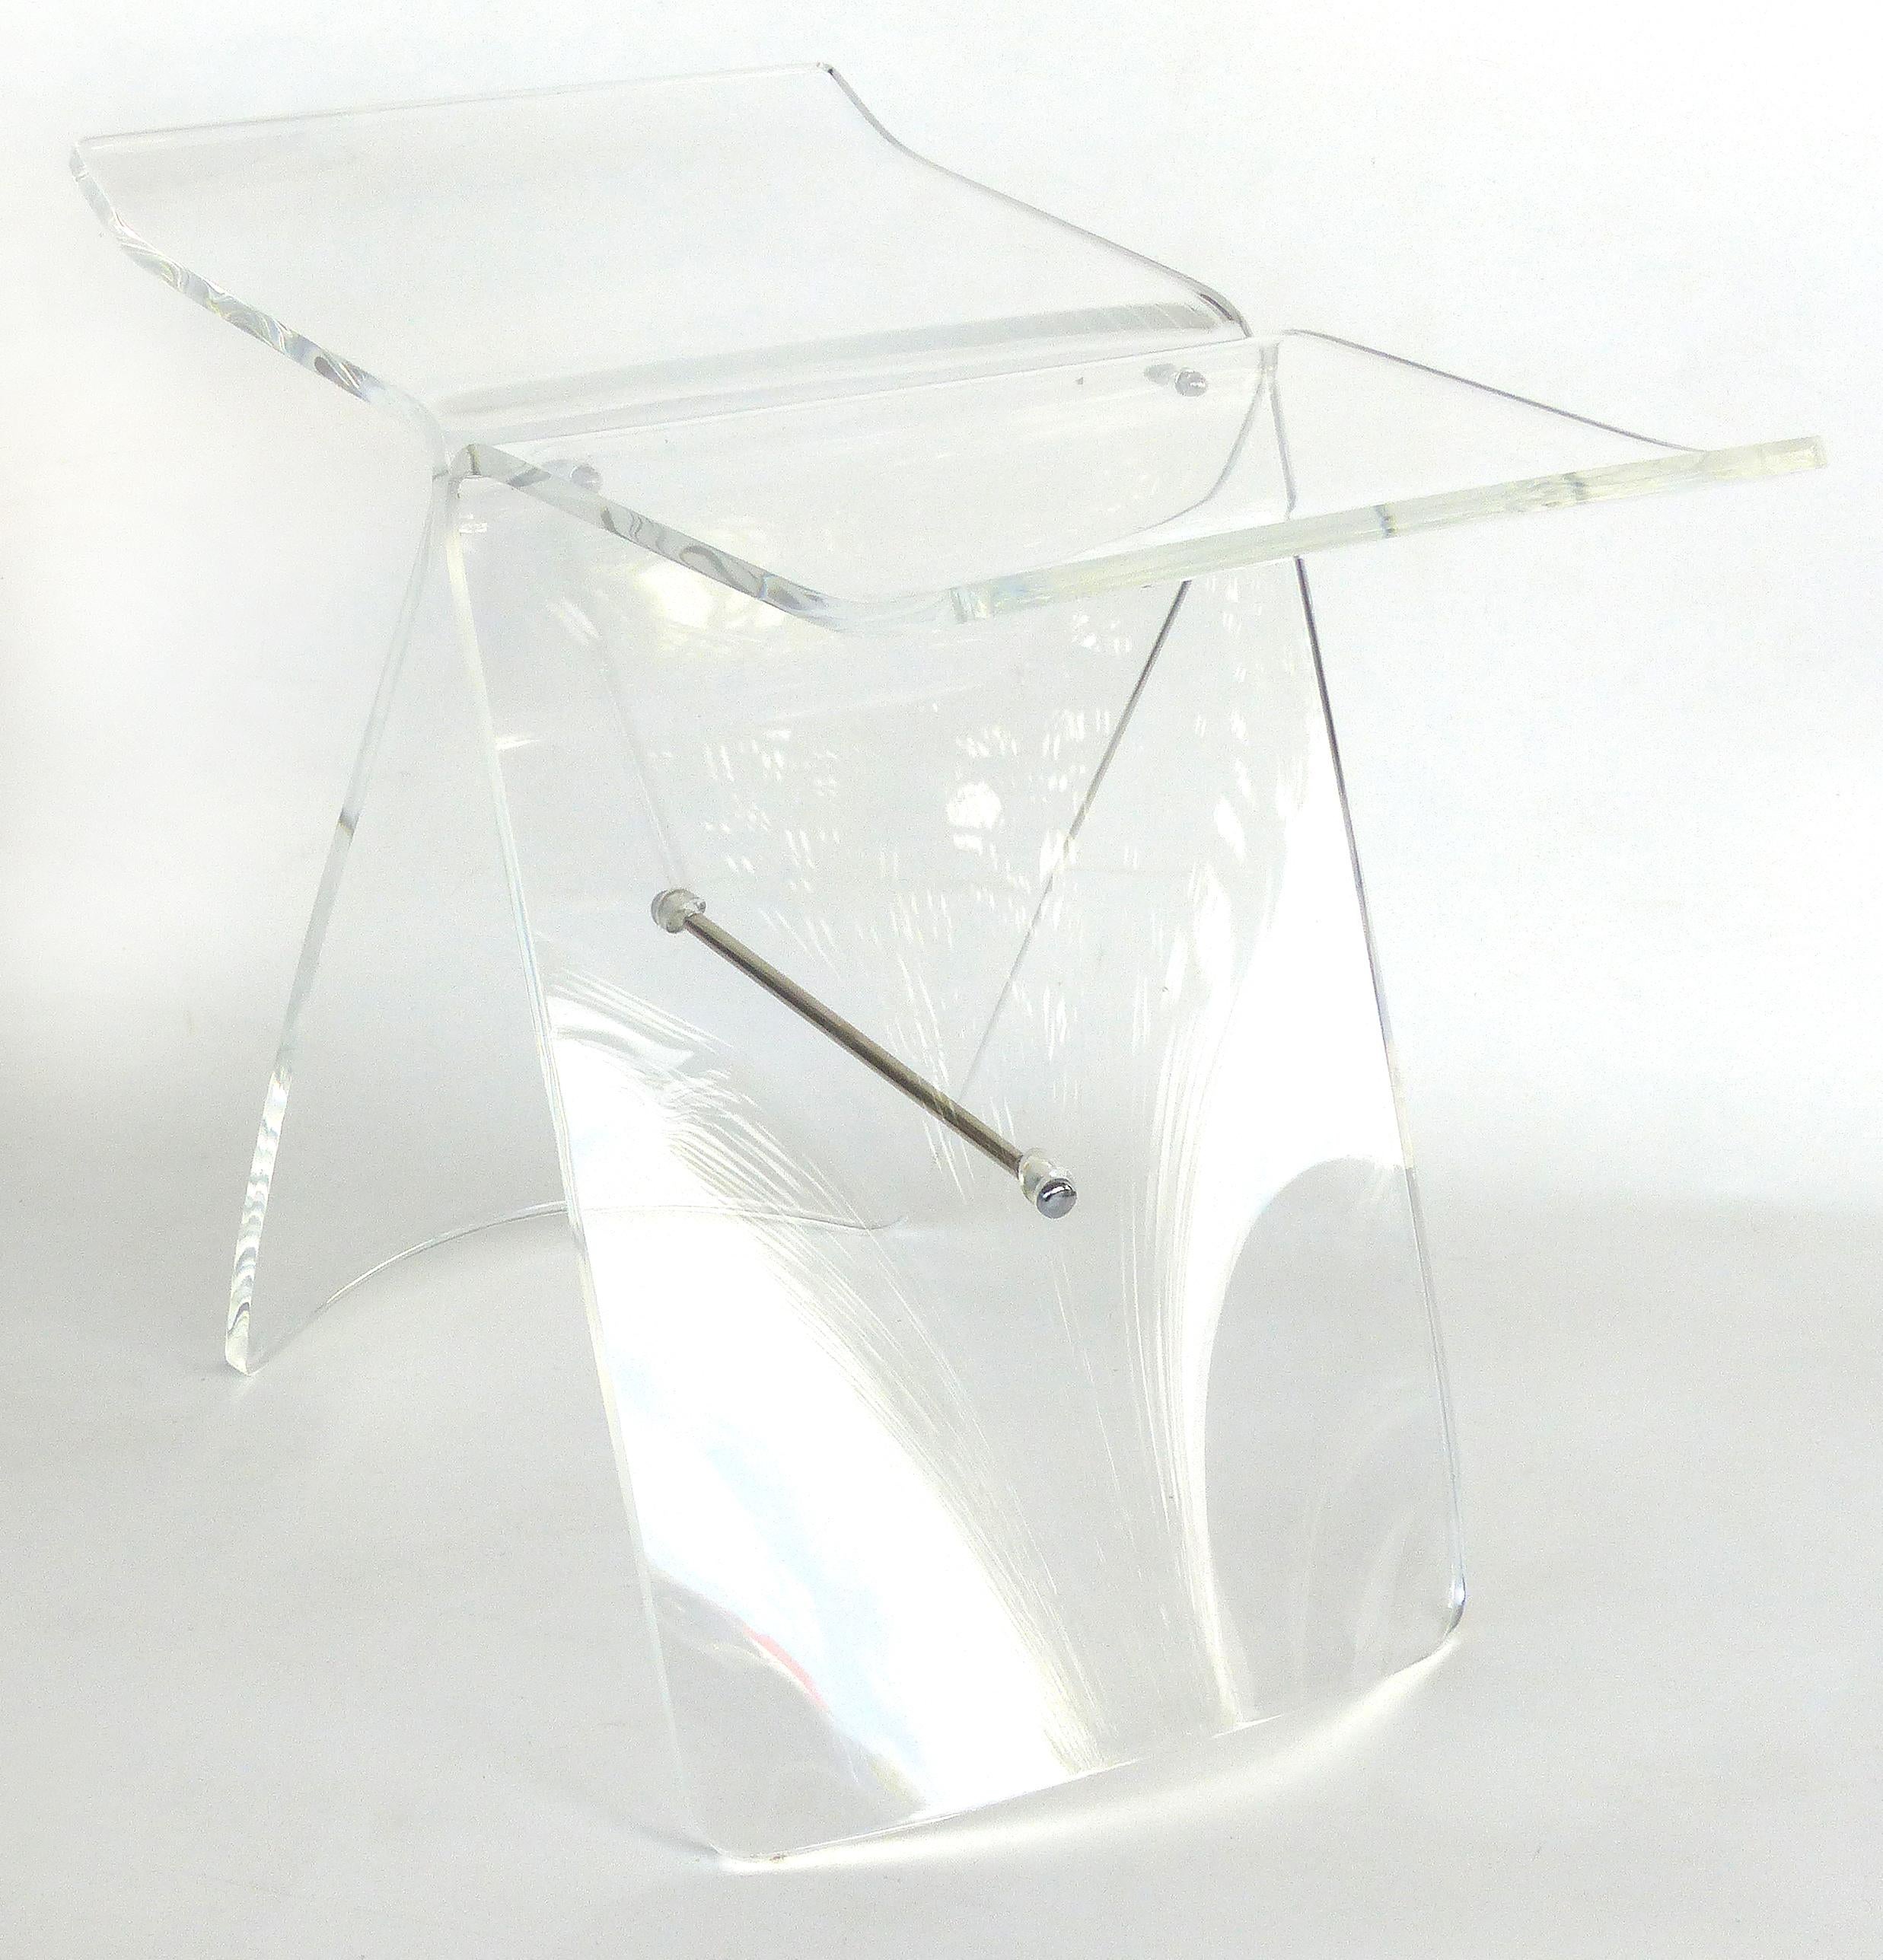 Lucite Butterfly Stool after Original by Sori Yanagi in Bentwood

A new custom Lucite butterfly stool after the original bentwood stool by Sori Yanagi. The stool has graceful curves and is accented with polished stainless steel hardware. The raised